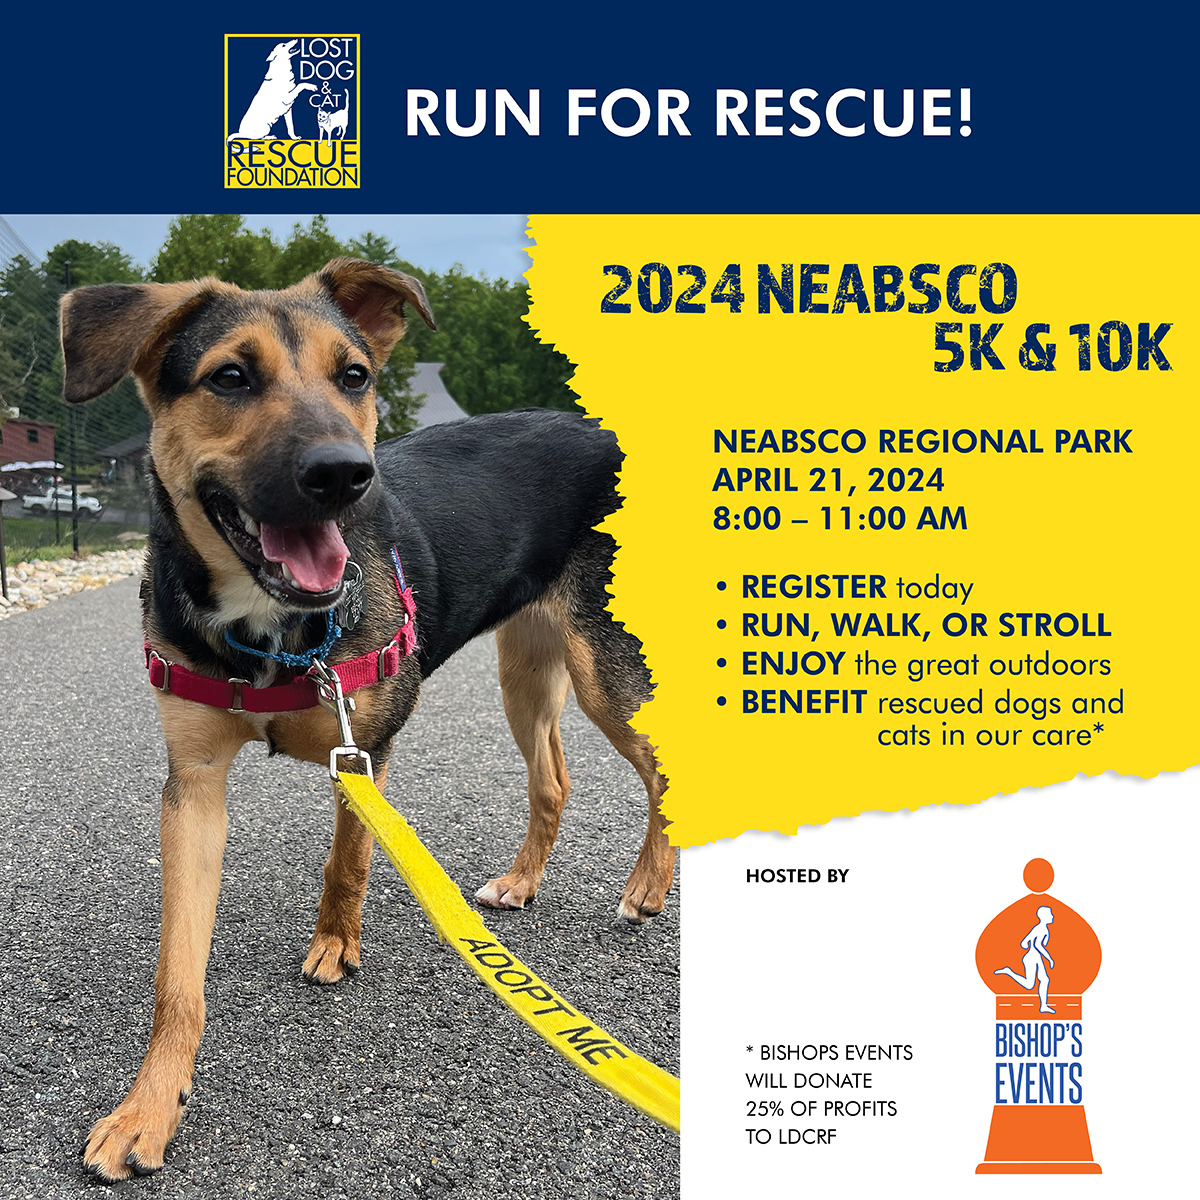 🏃‍♂️🐾 Lace up your running shoes and join us for a morning of fun at the Nebasco 5k/10k! ] There’s still time to register and make a difference for the pets at LDCRF. Sign up now and help us cross the finish line in the race to save lives! 🏁❤️ ow.ly/GuJm50RknOA